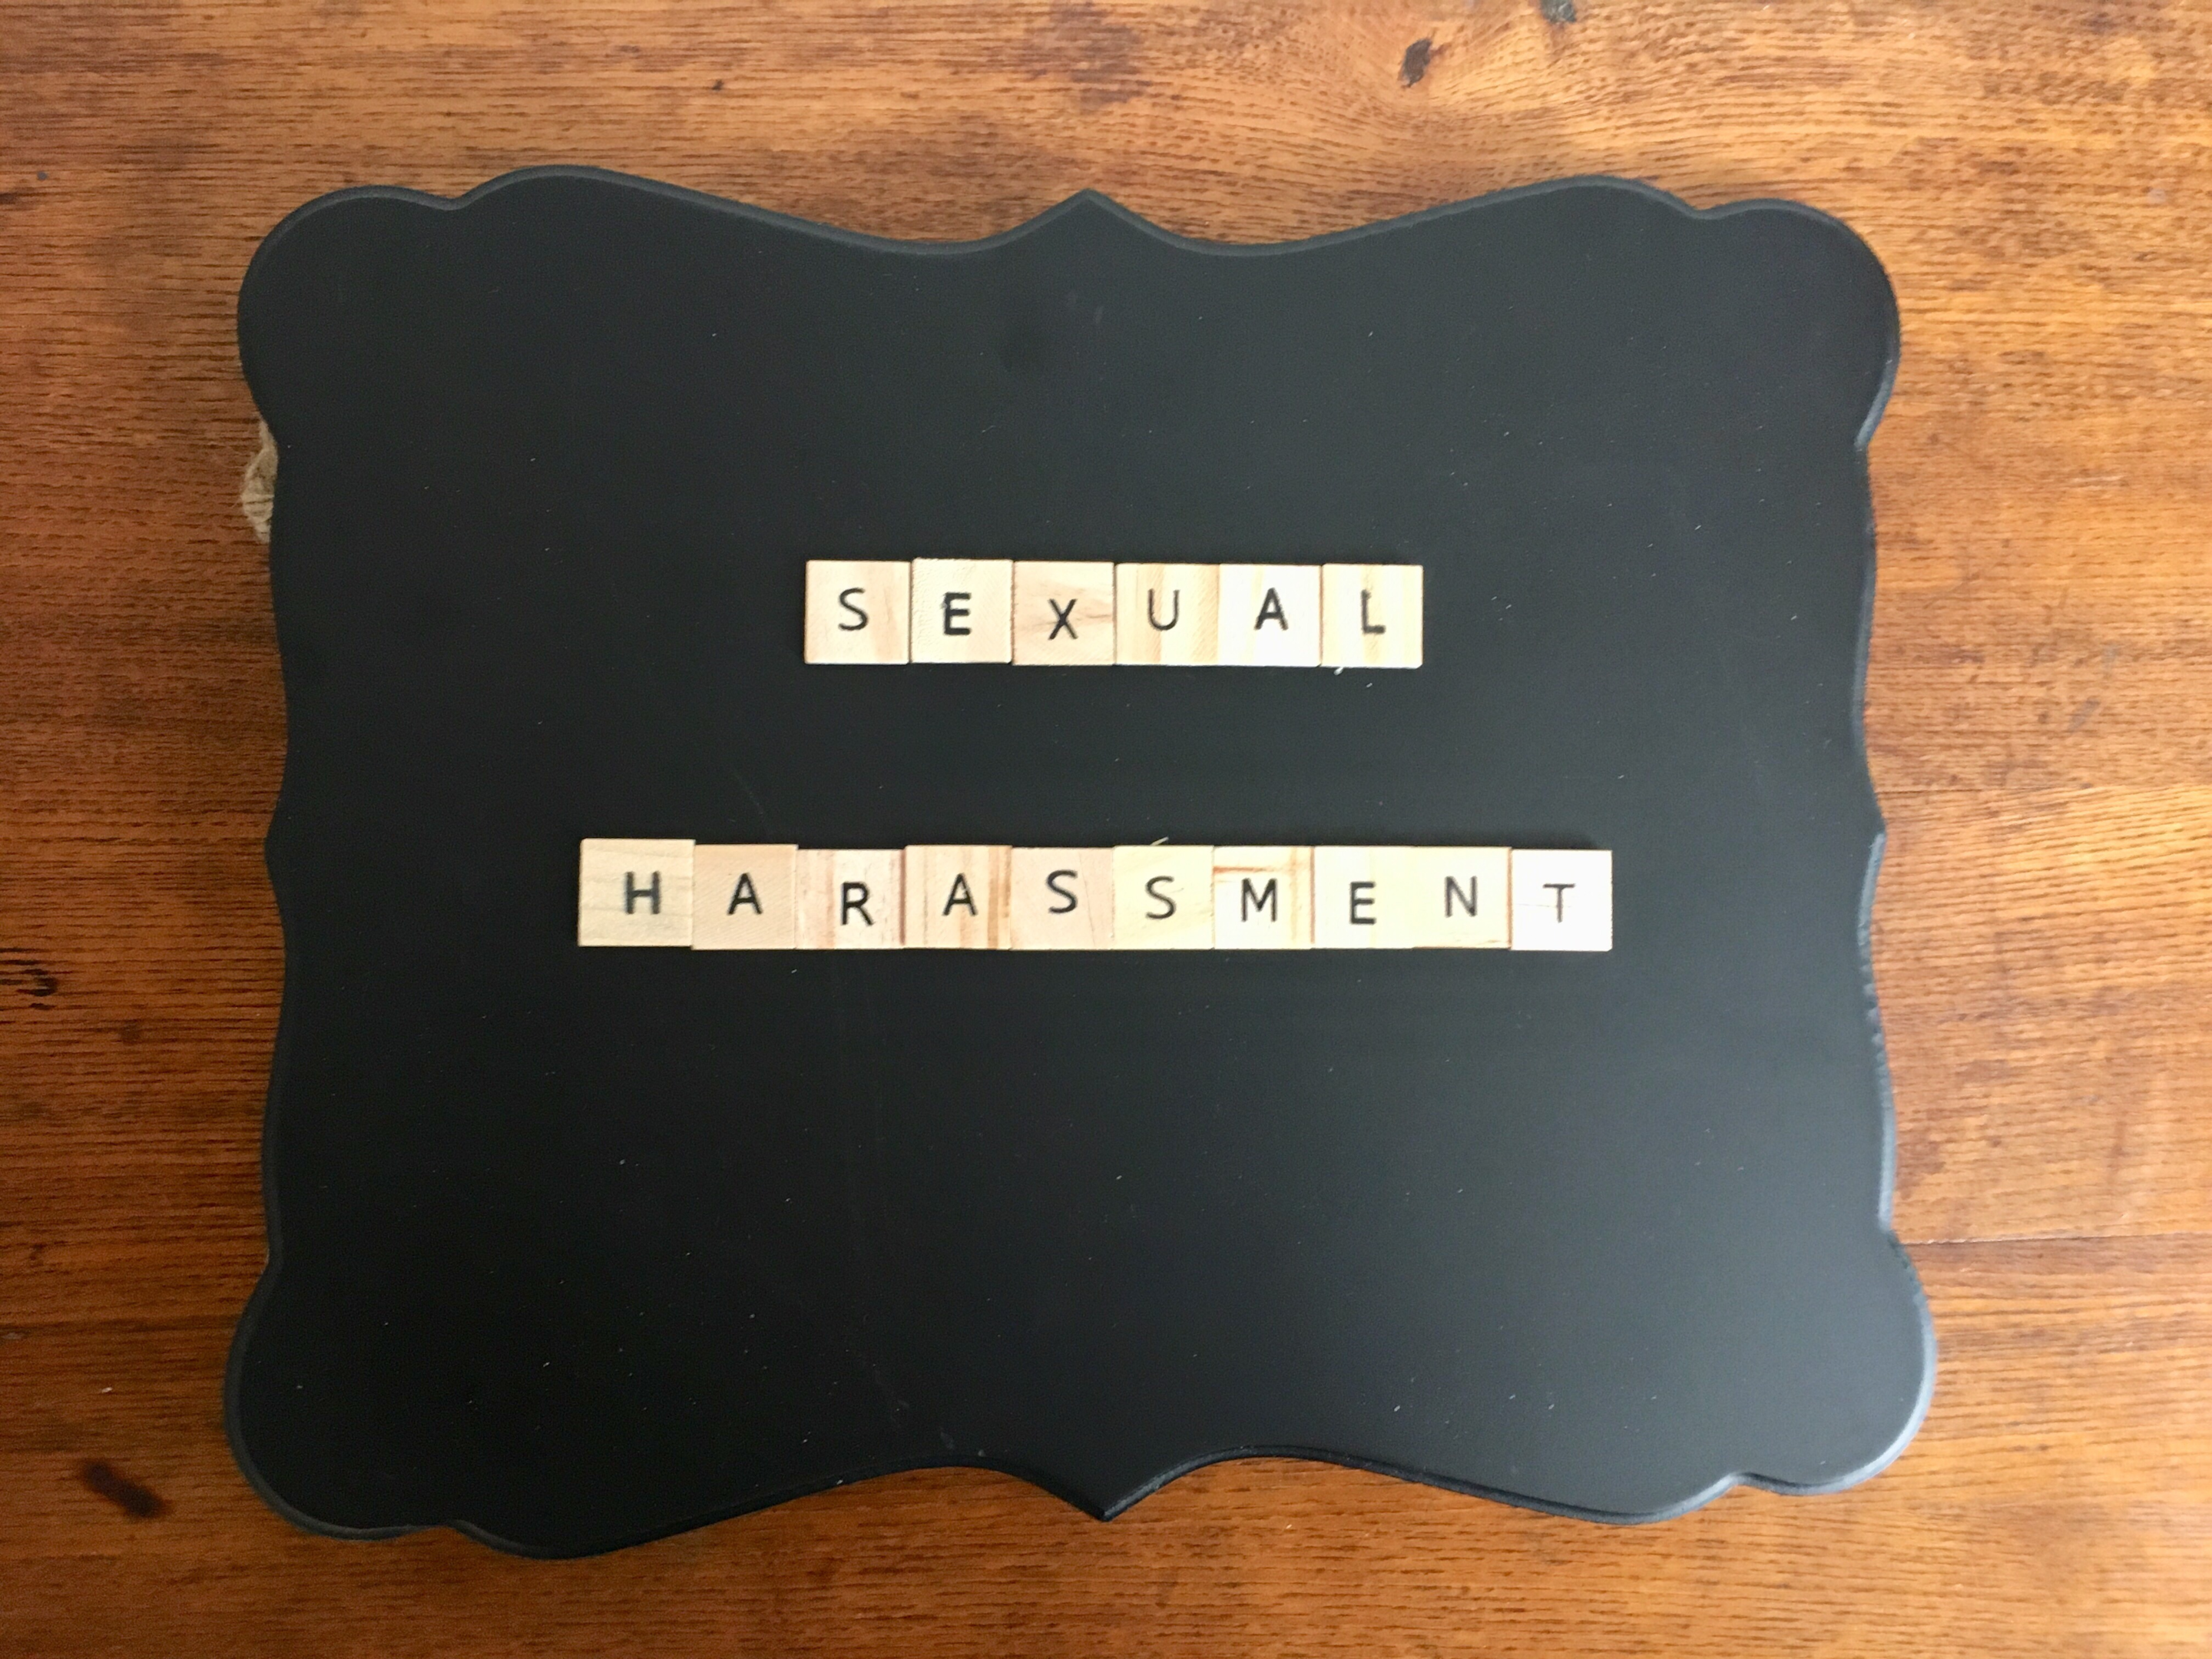 "The words 'SEXUAL HARASSMENT' starkly displayed on a wall, a raw reminder to address and eradicate such misconduct in the workplace."